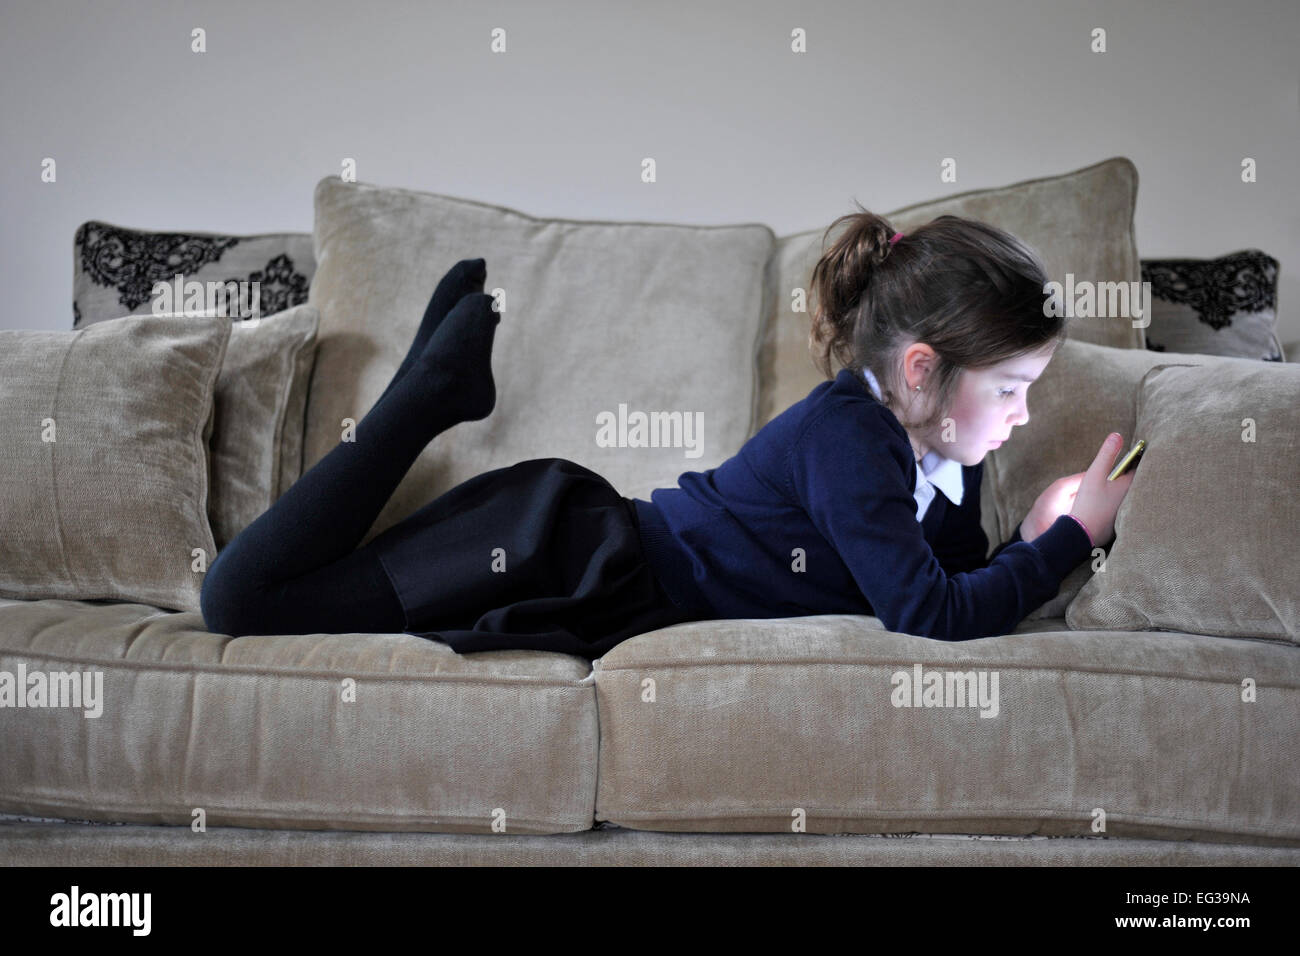 young girl in school uniform at home using handheld device Stock Photo